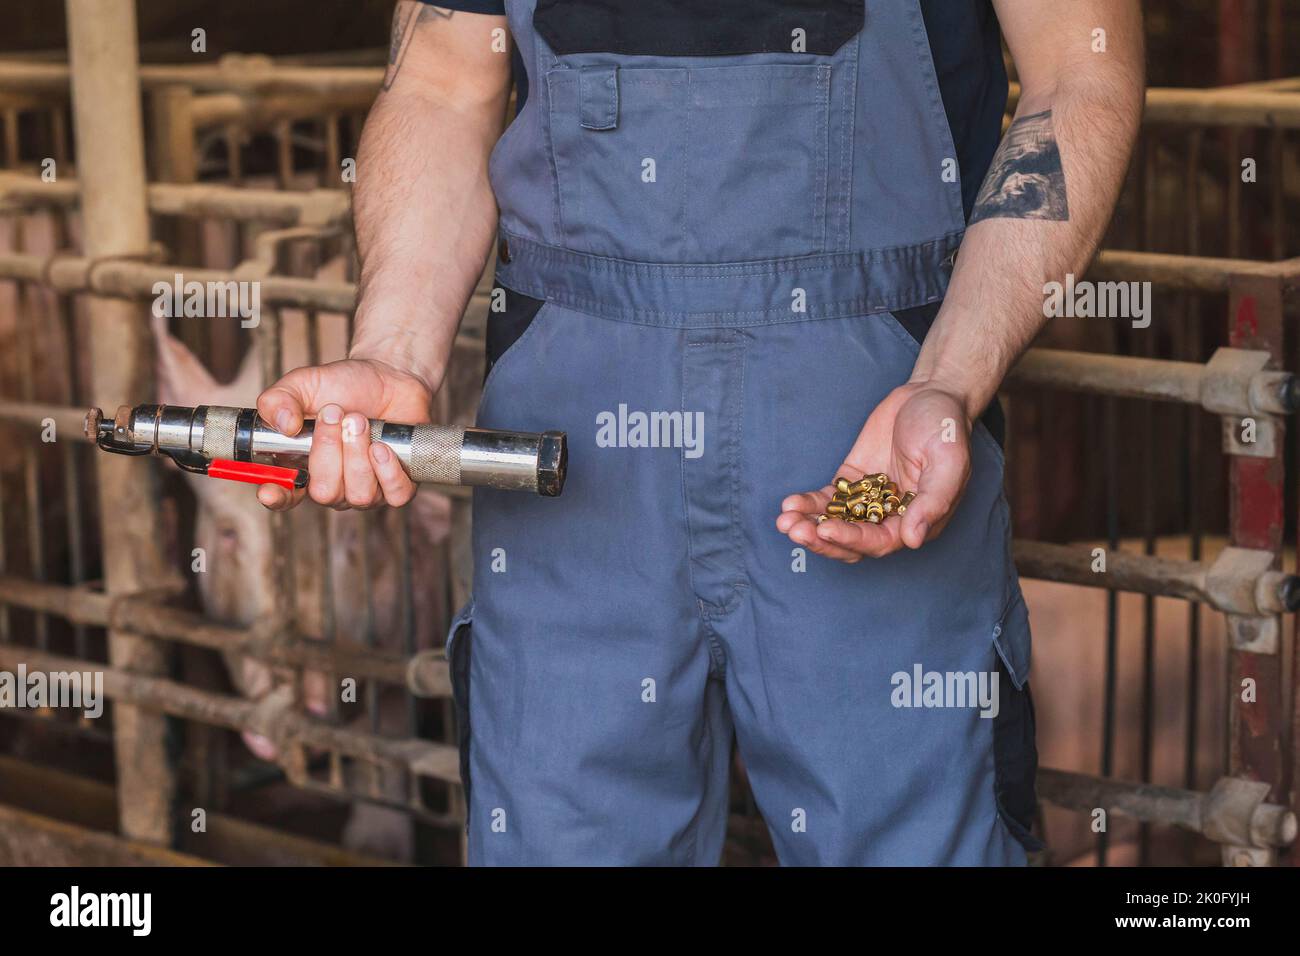 Farm worker holding a gun for humane killing of animals Stock Photo